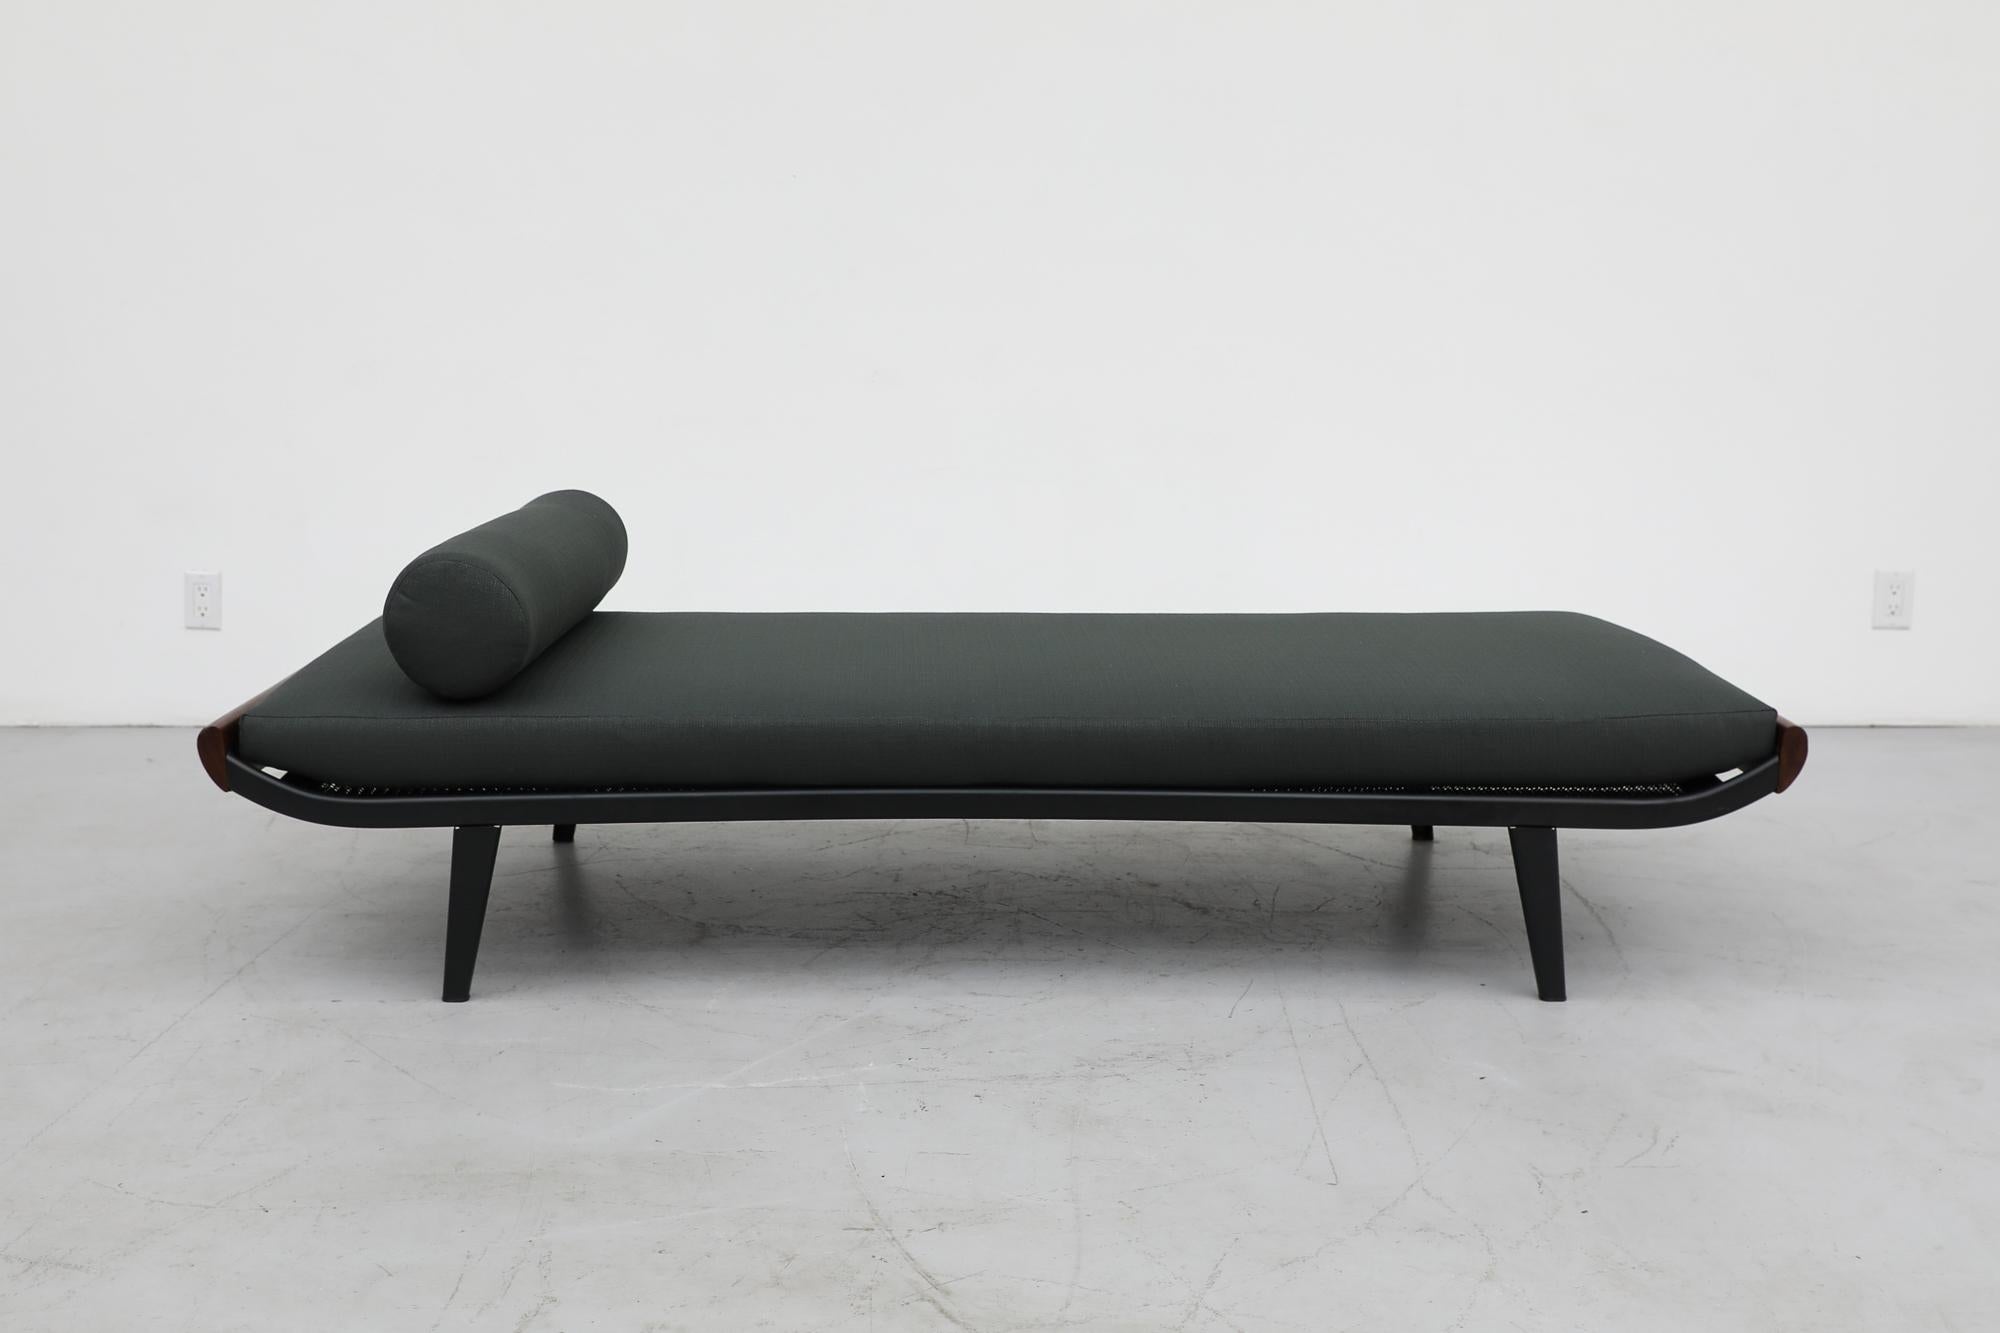 1960s Cleopatra daybed by A.R. Cordemeyer with teak wood ends, enameled dark grey metal frame and 